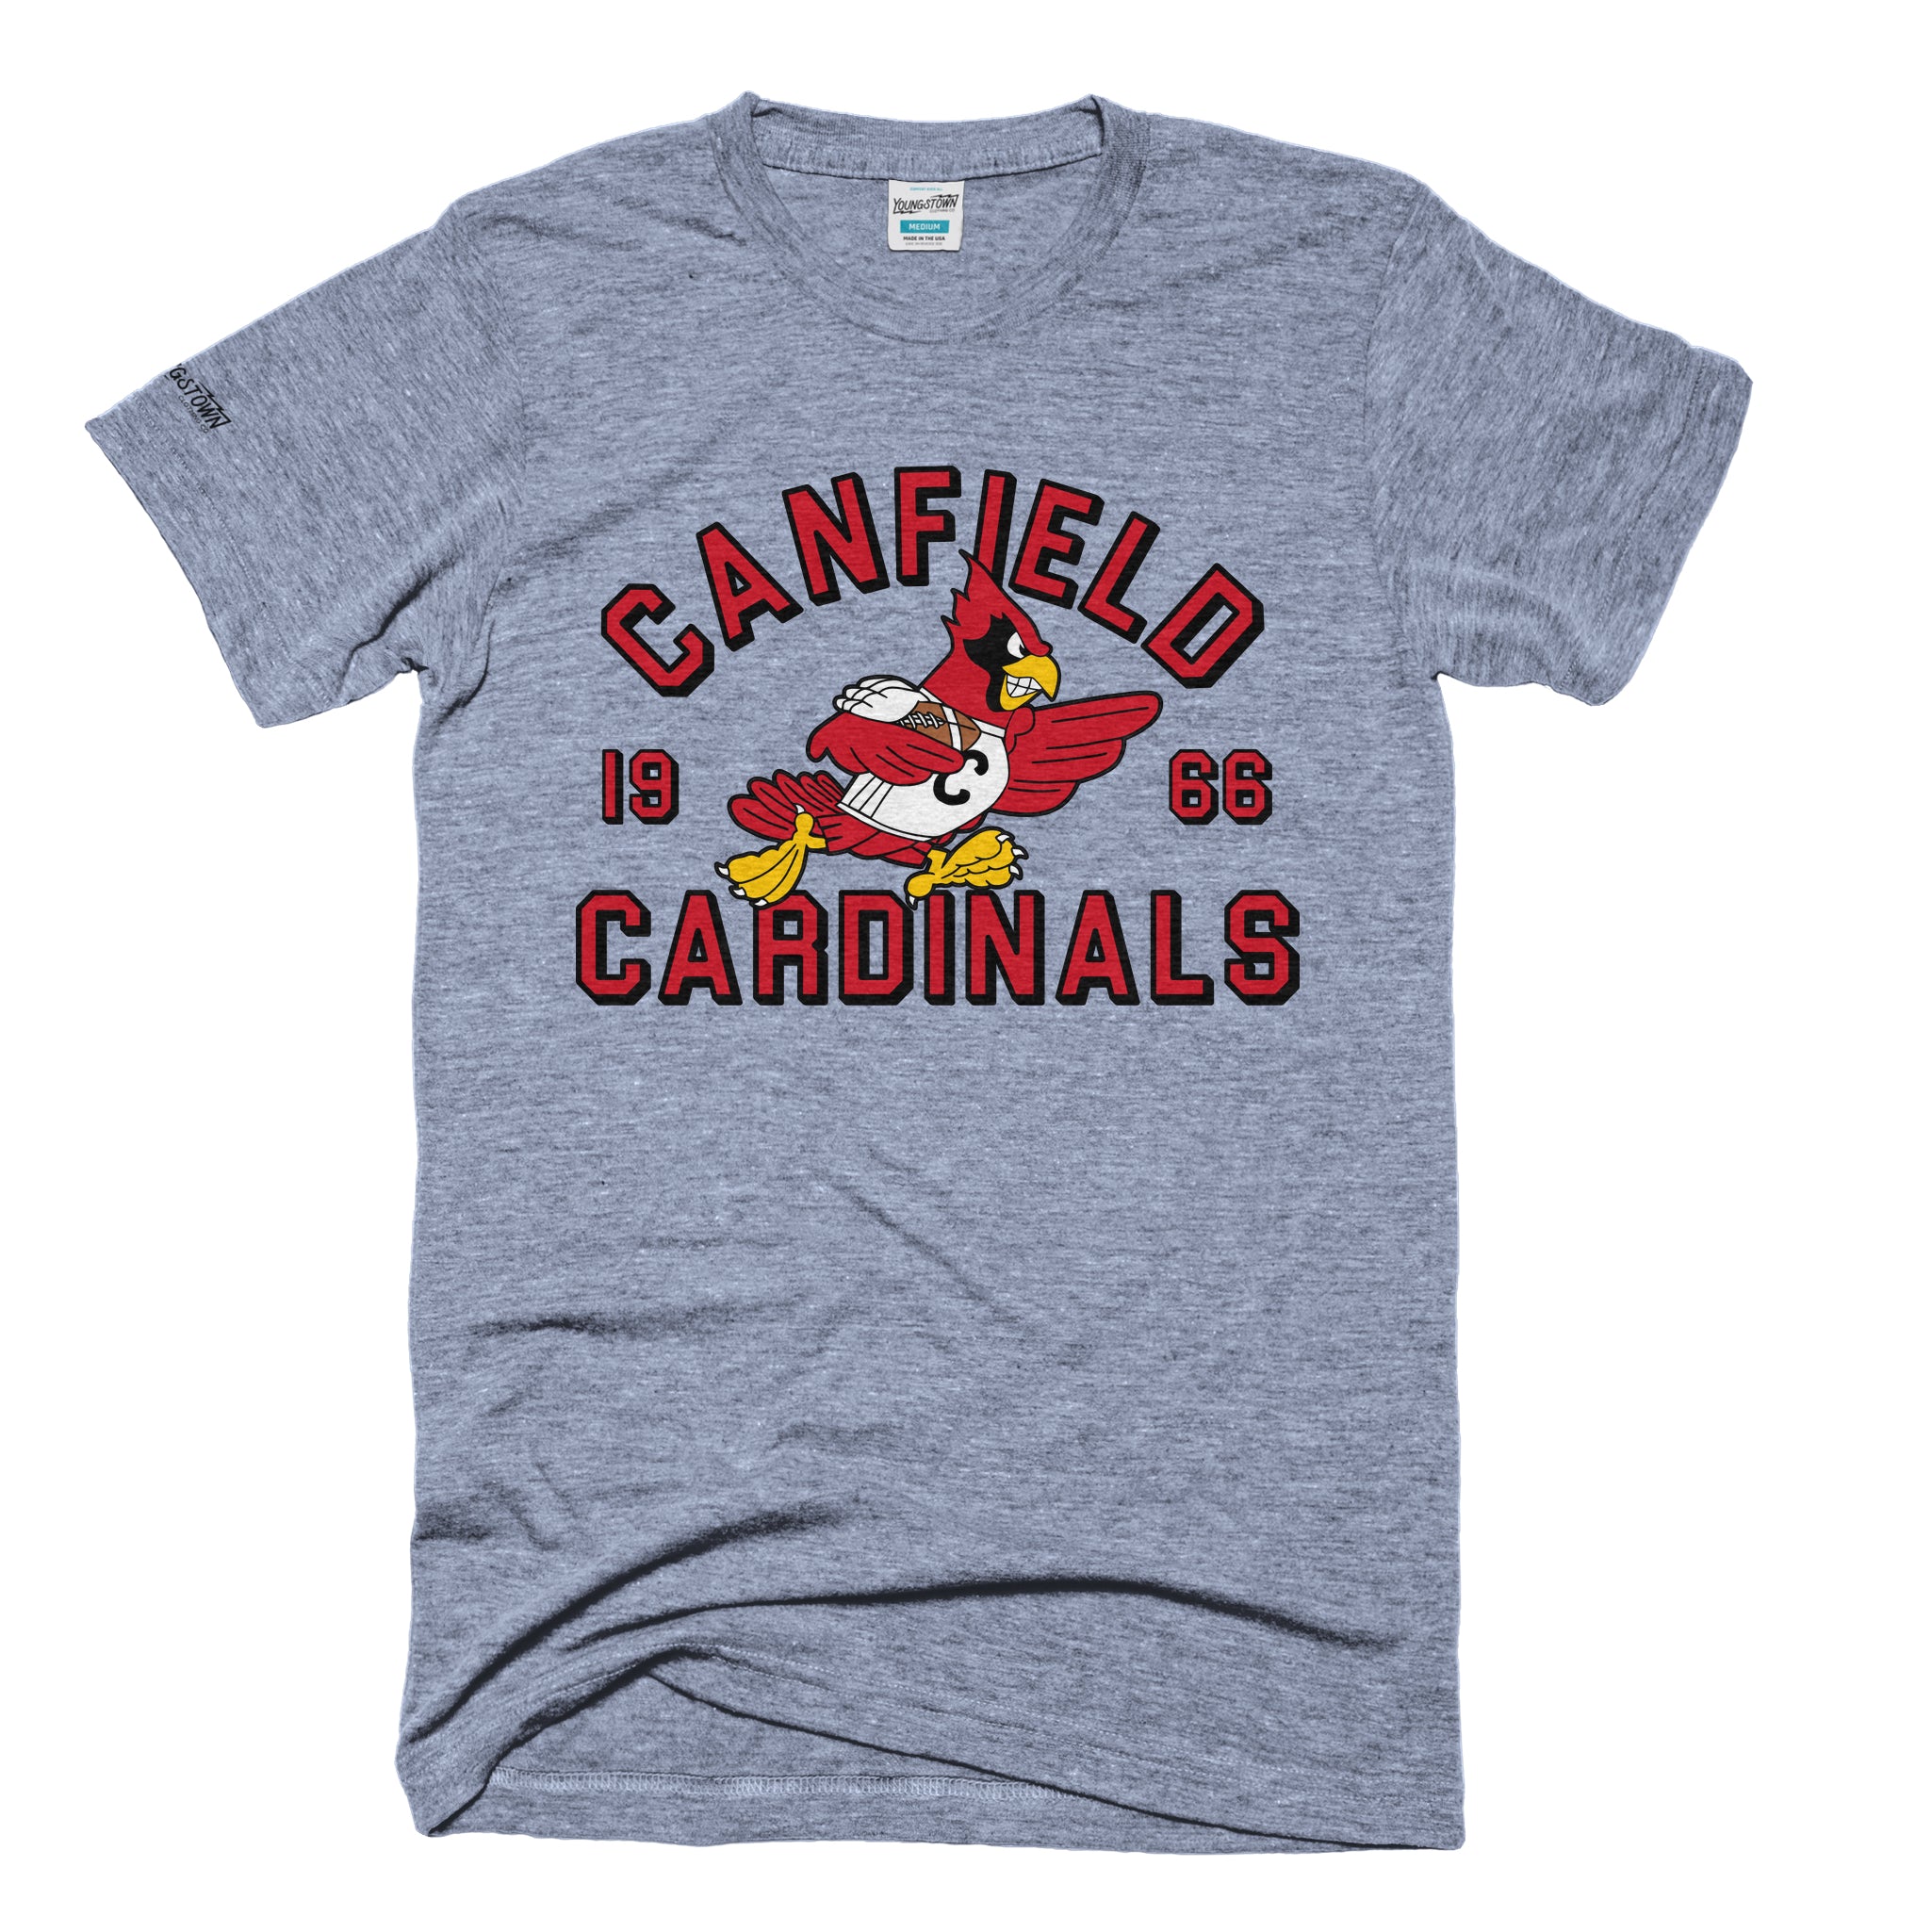  University of Louisville Cardinals Large One Color T